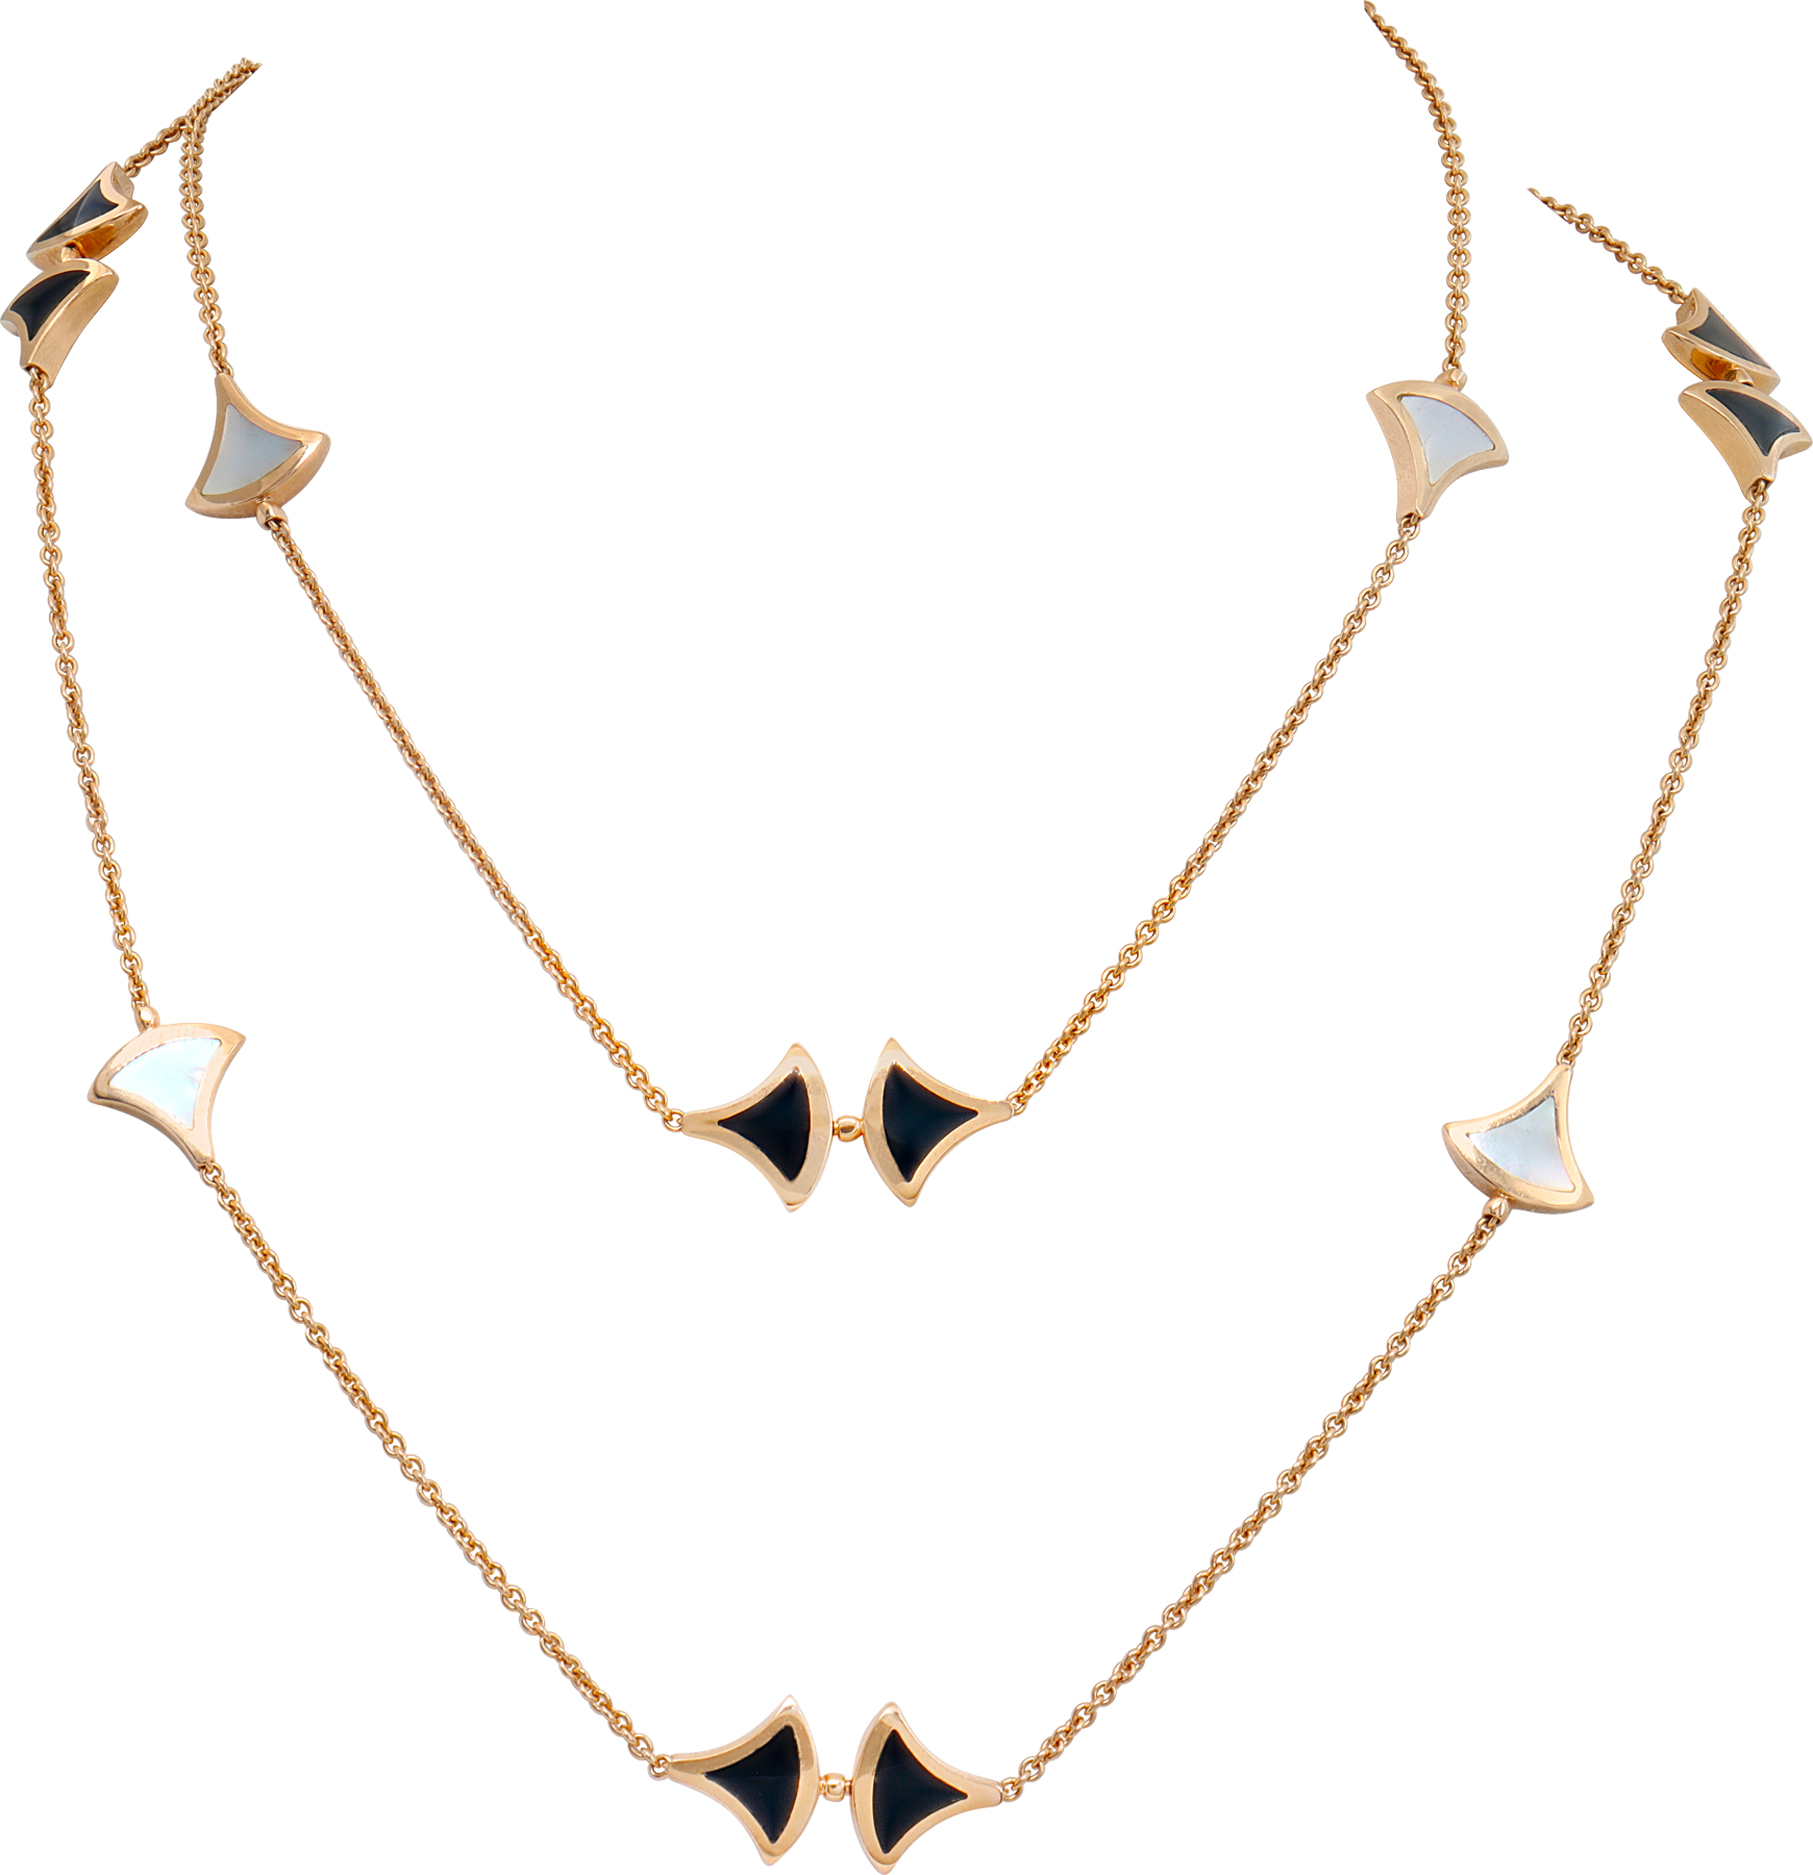 Bvlgari Divas Dream mother of pearl & onyx necklace in 18k rose gold